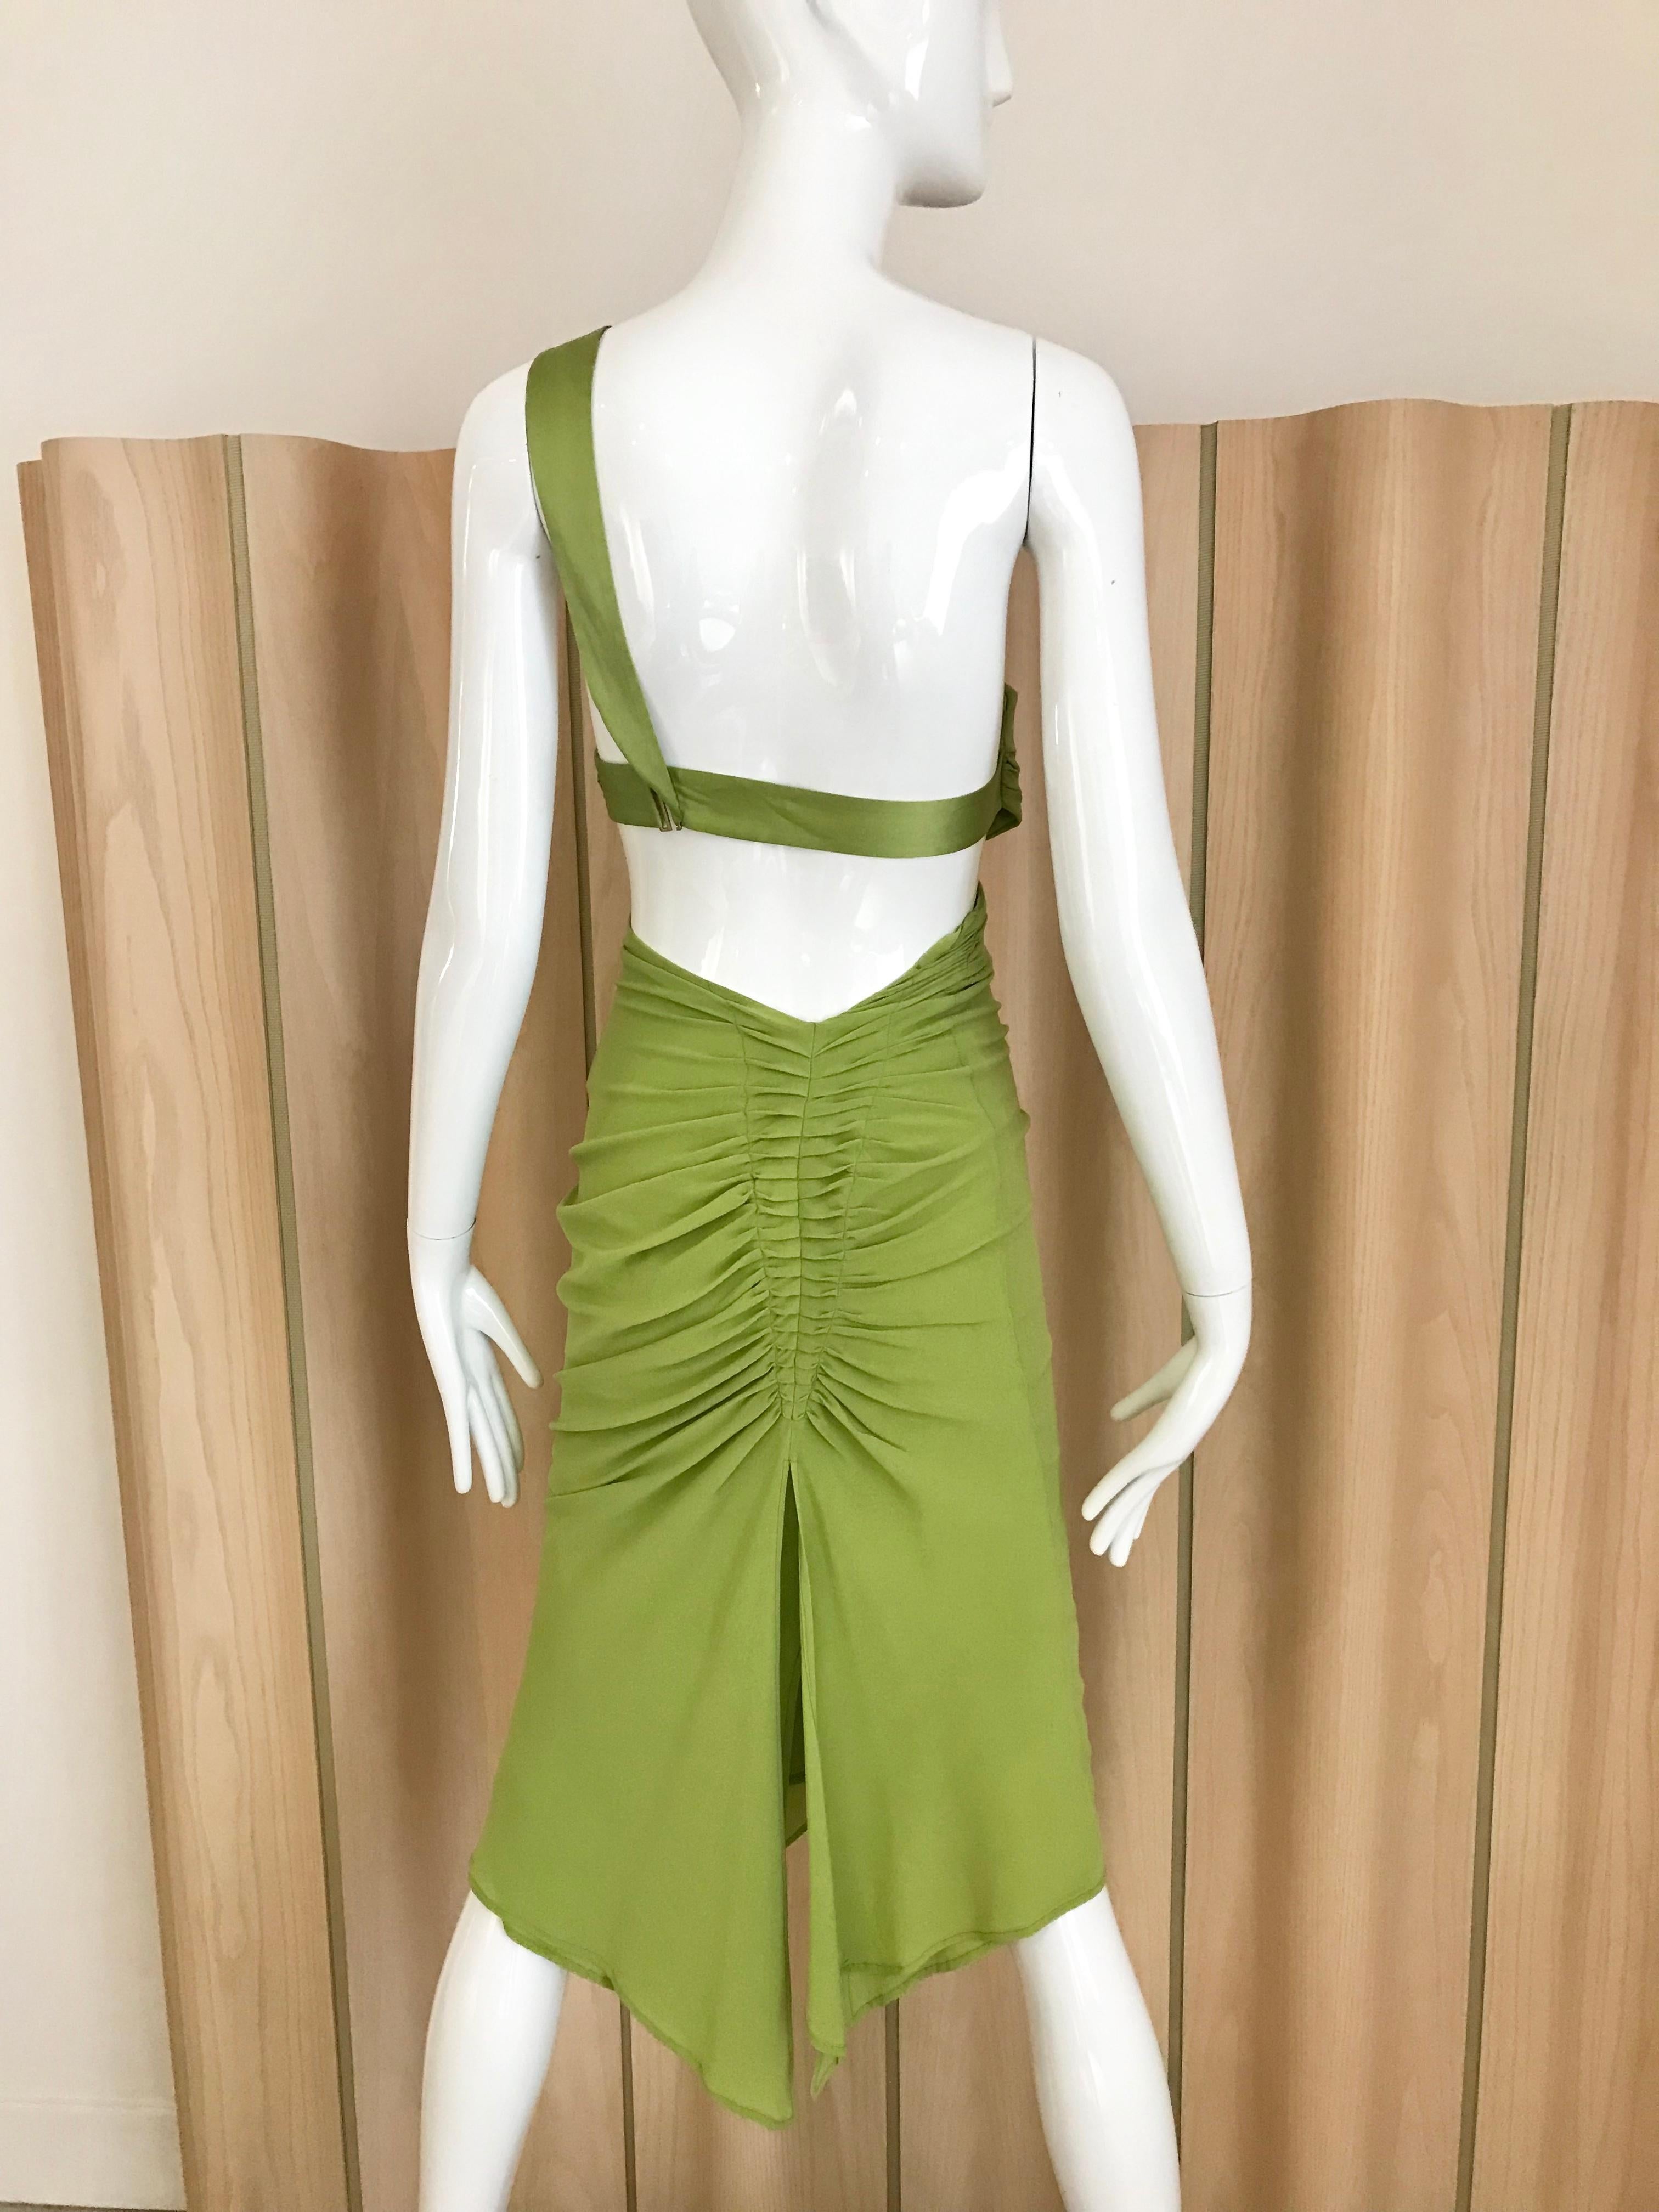 Green Gucci by Tom Ford cut out silk dress. 
Marked size 40 but it fit small than 40. Best to fit size 0 or 2 US size
See exact measurement below:
Bust: 30 inches/ waist: 24 inches/ Hip 32 inches/ Dress length 45 inches/